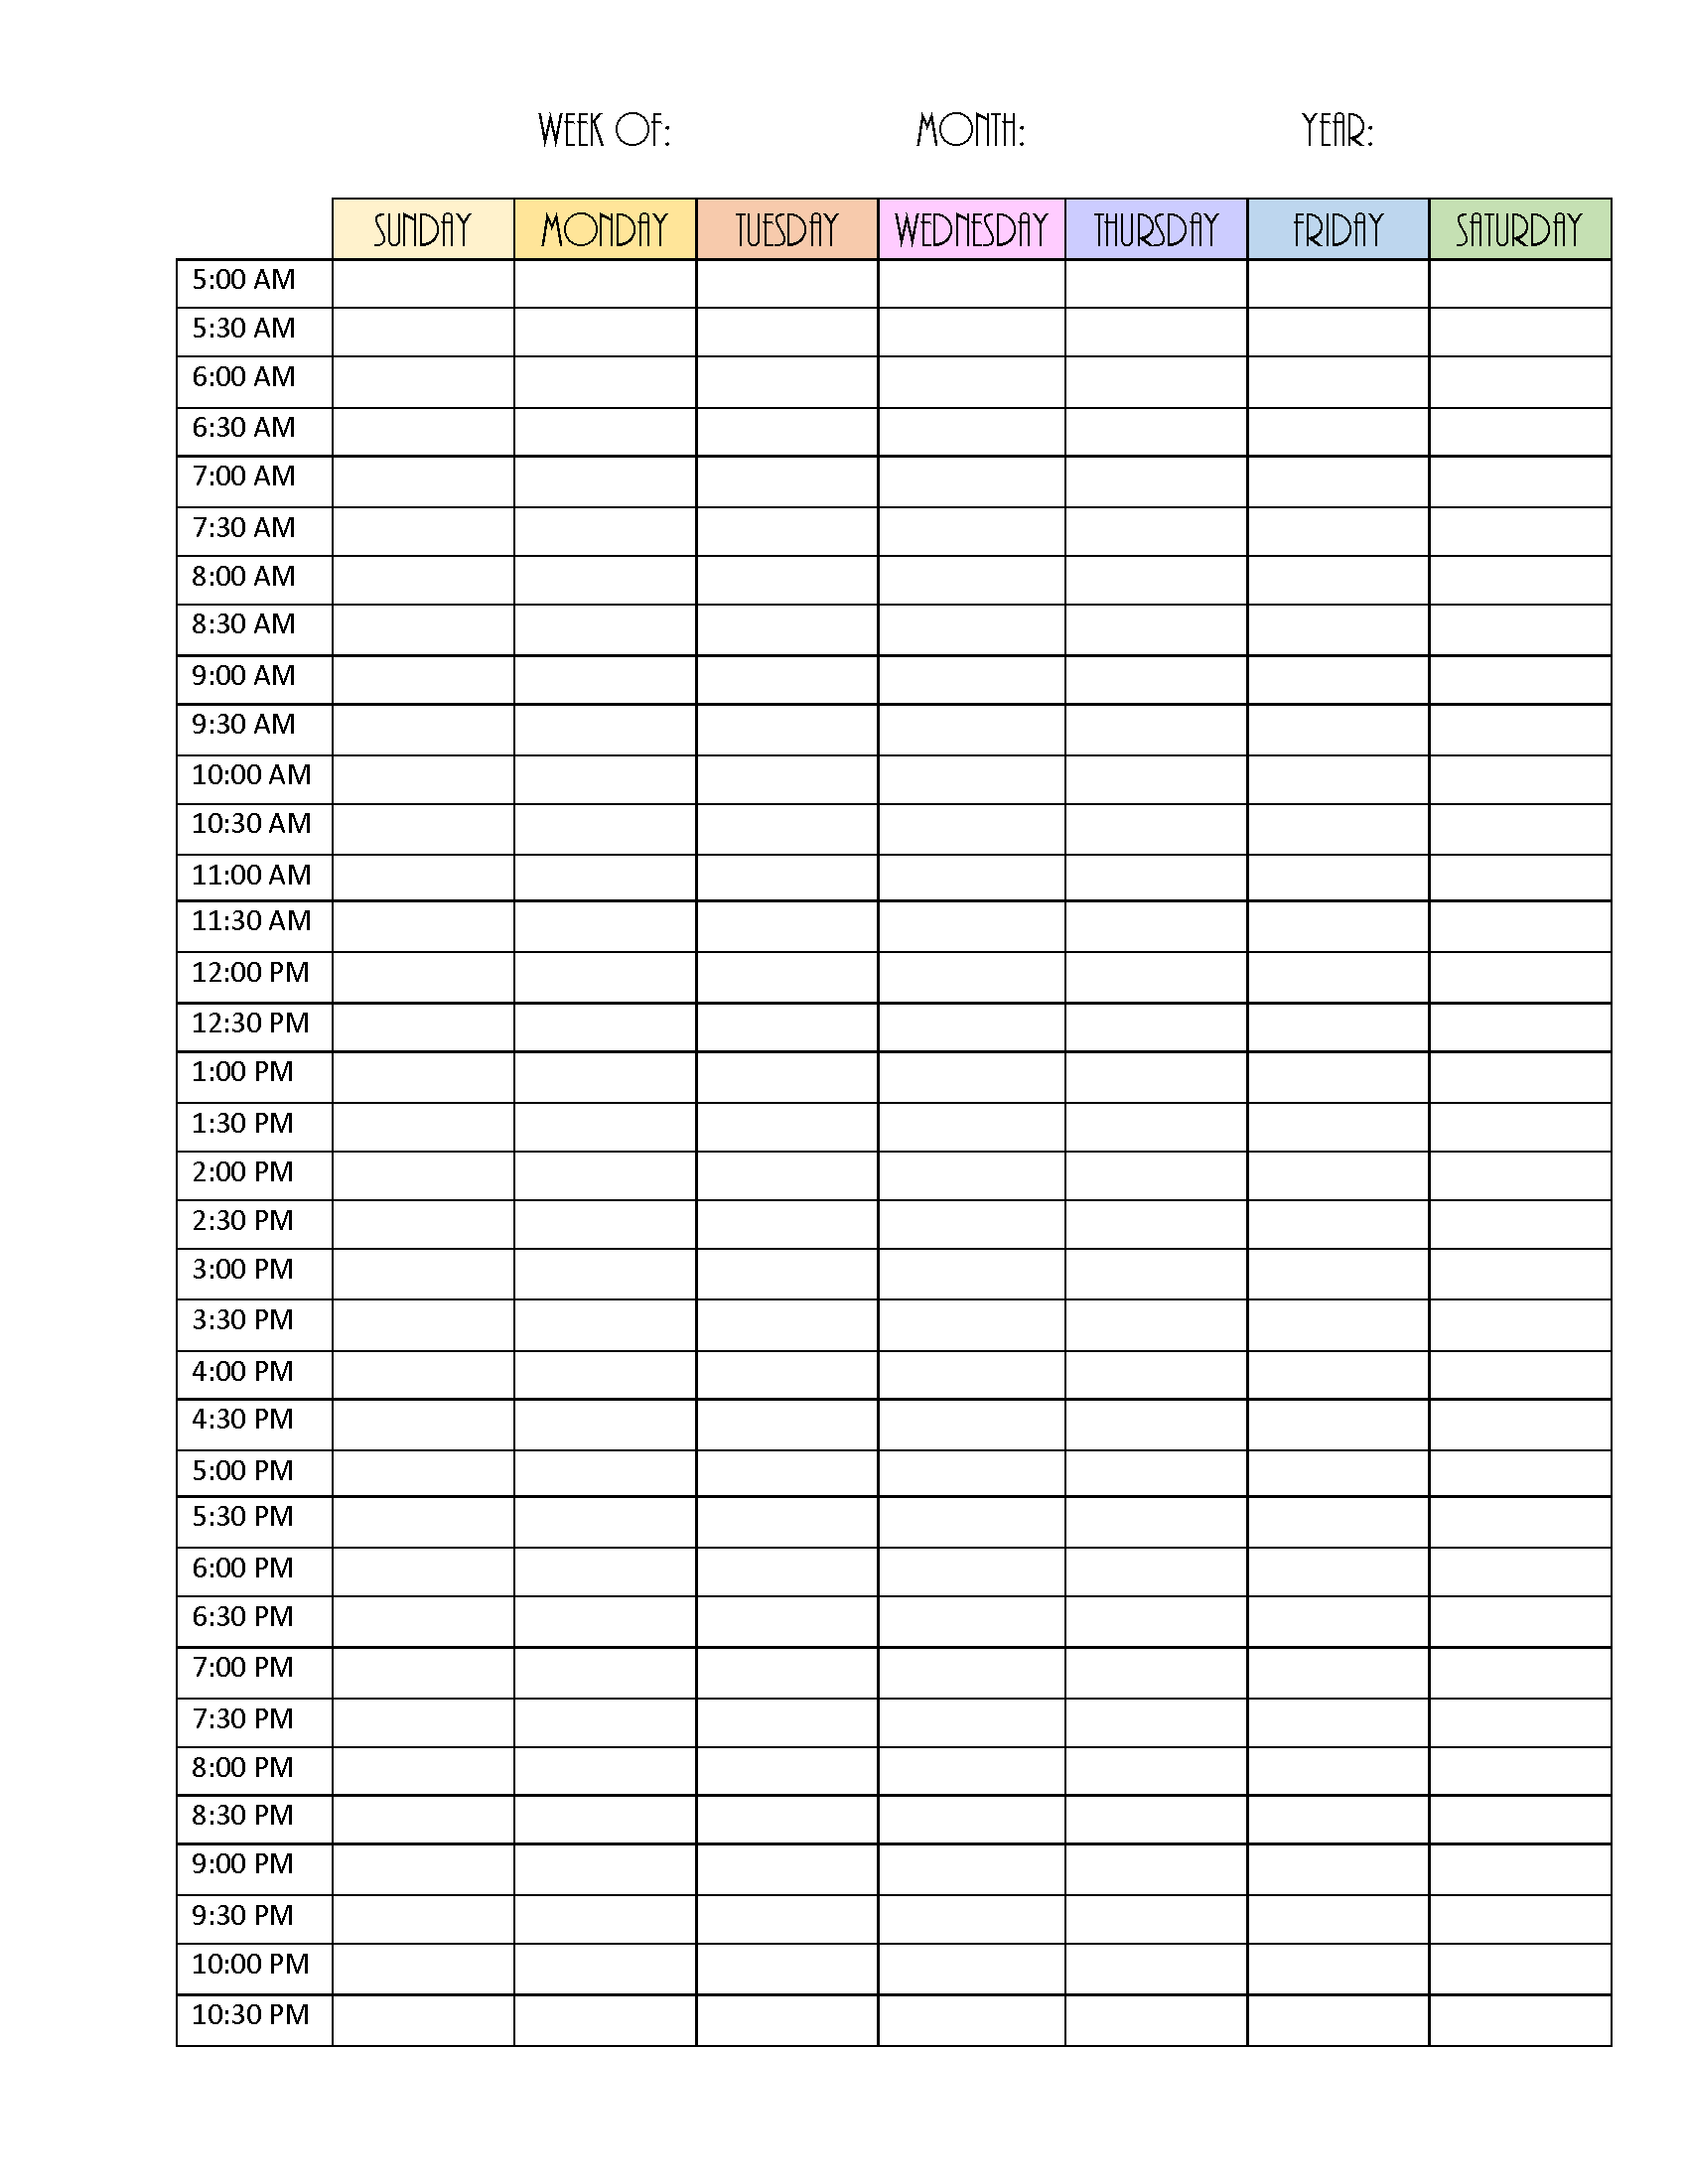 blank-calendar-weekly-customize-and-print